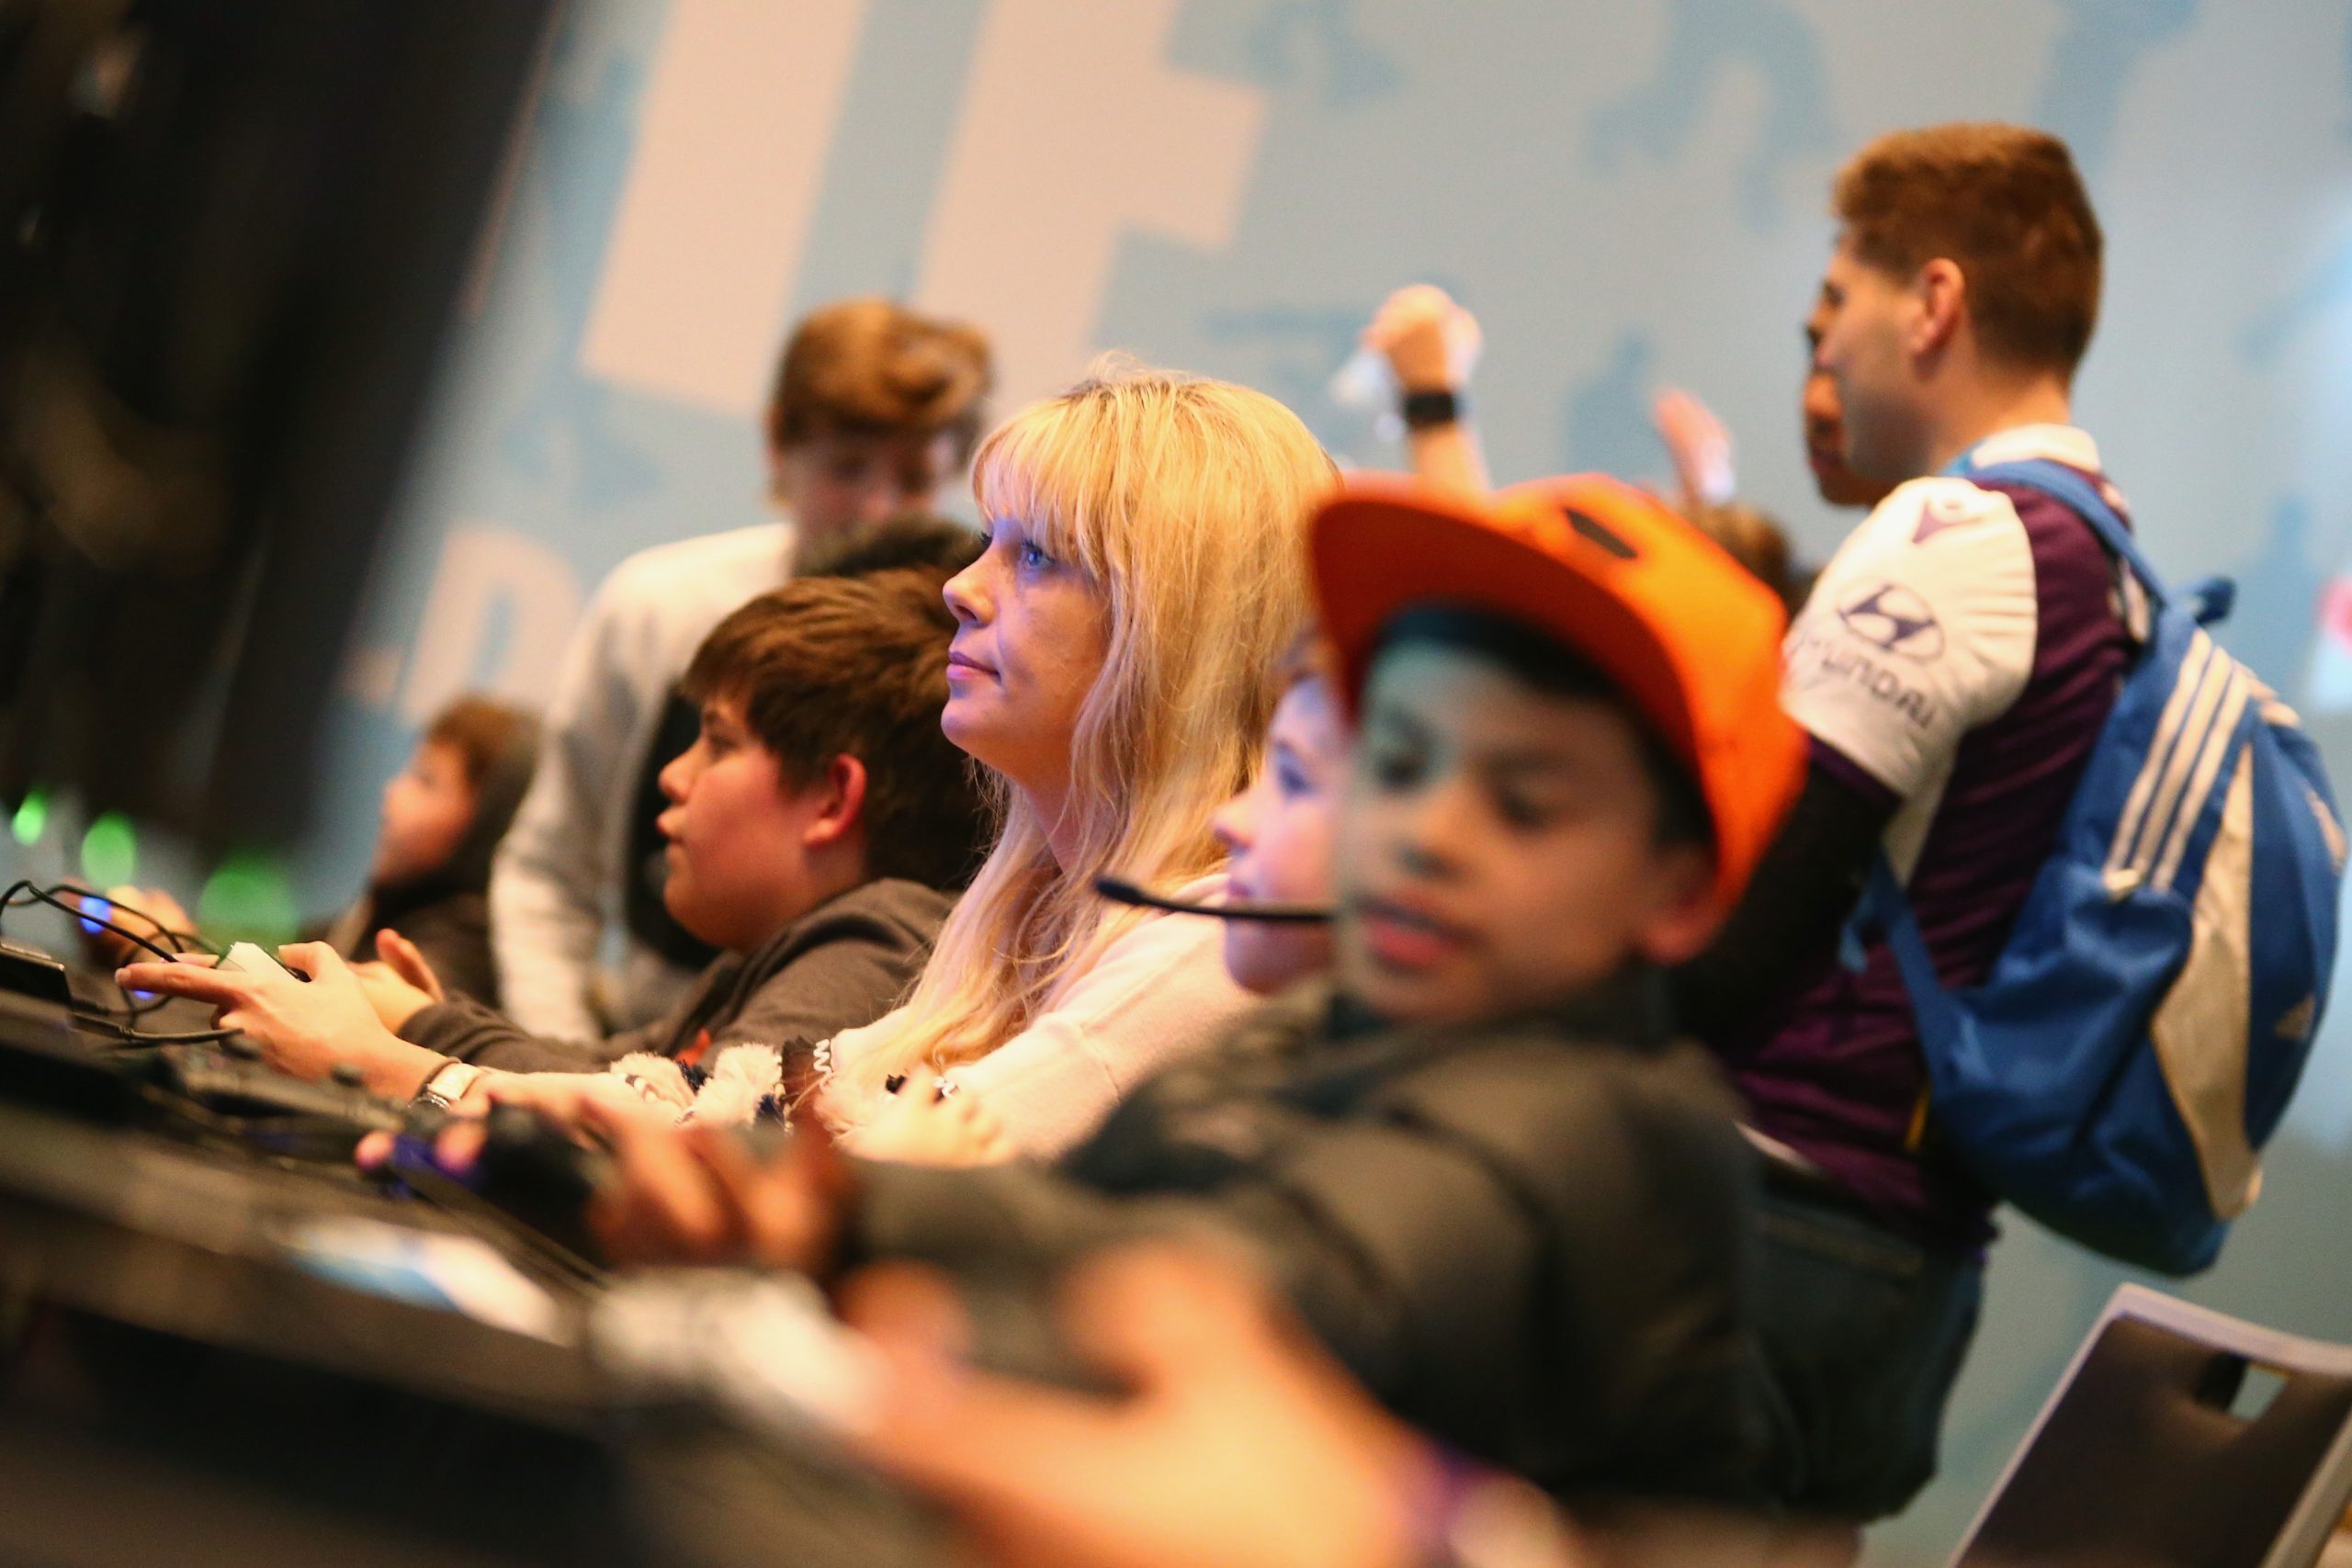 Esports has become one of the fastest growing industries in the world but stigmas still remain that give parents great pause. (Photo courtesy of Getty Images)